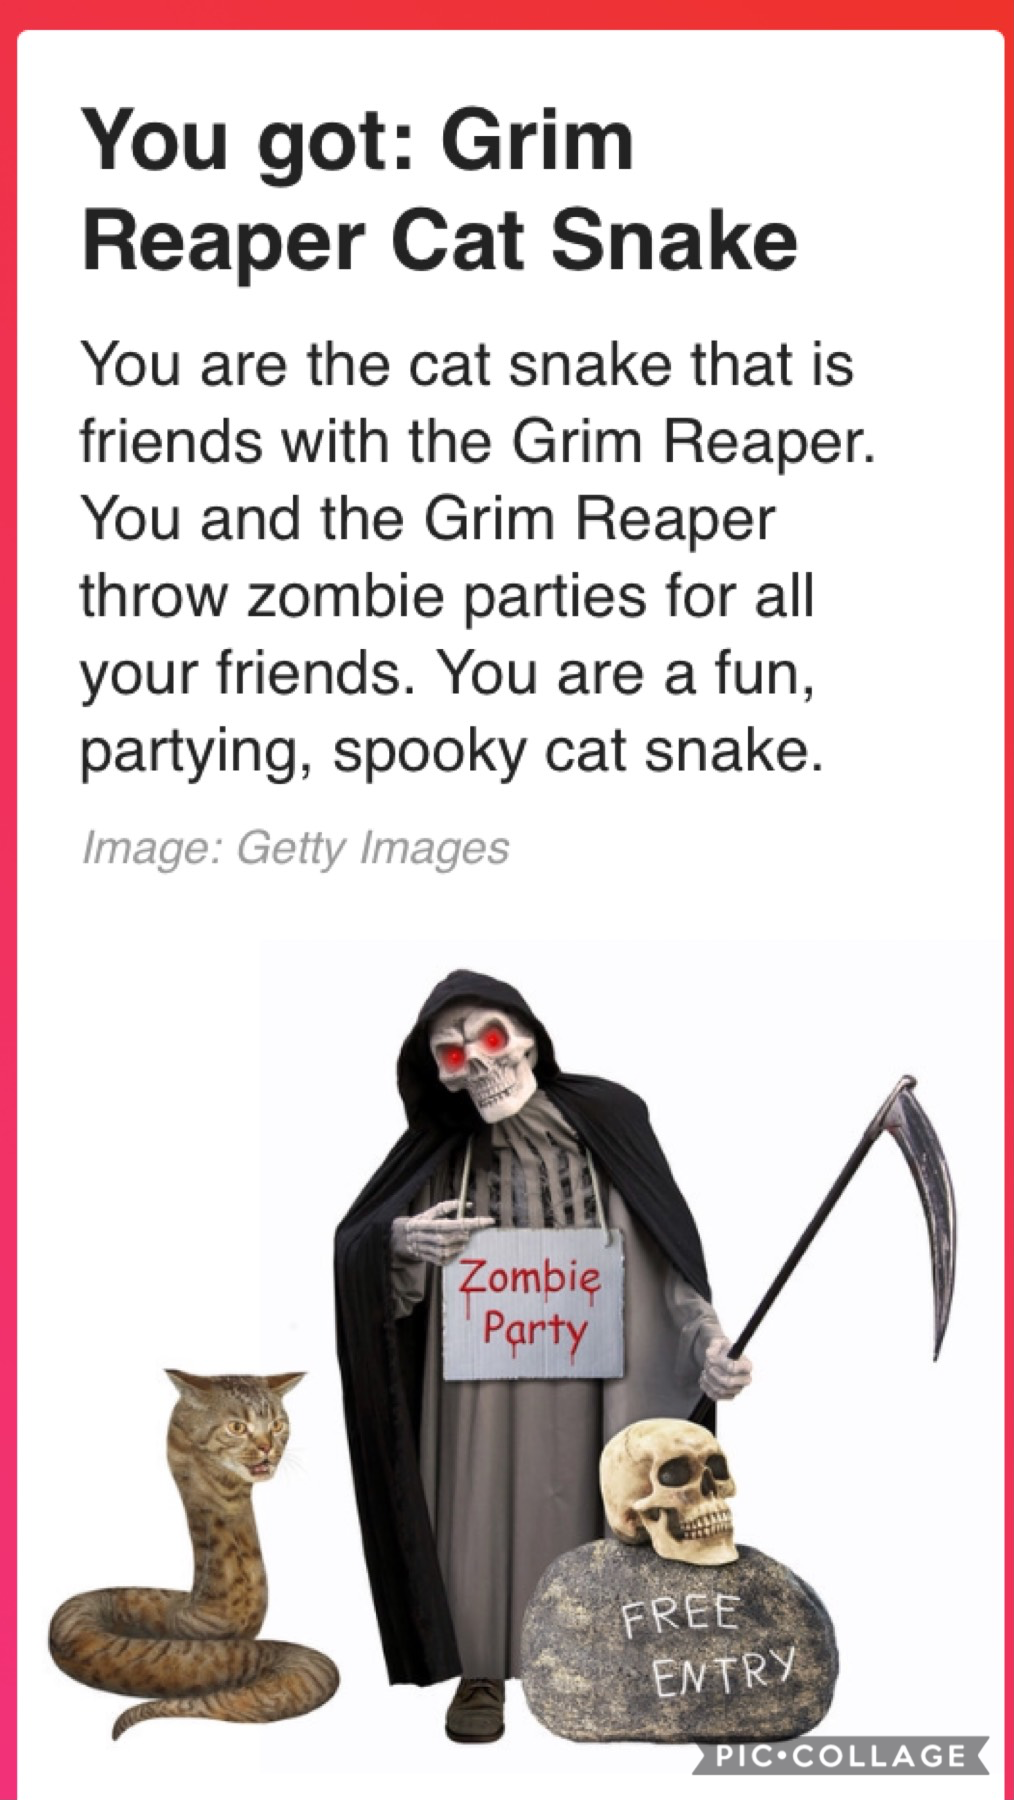 I took a buzzfeed quiz to see what type of cat-snake I am. This was the result.